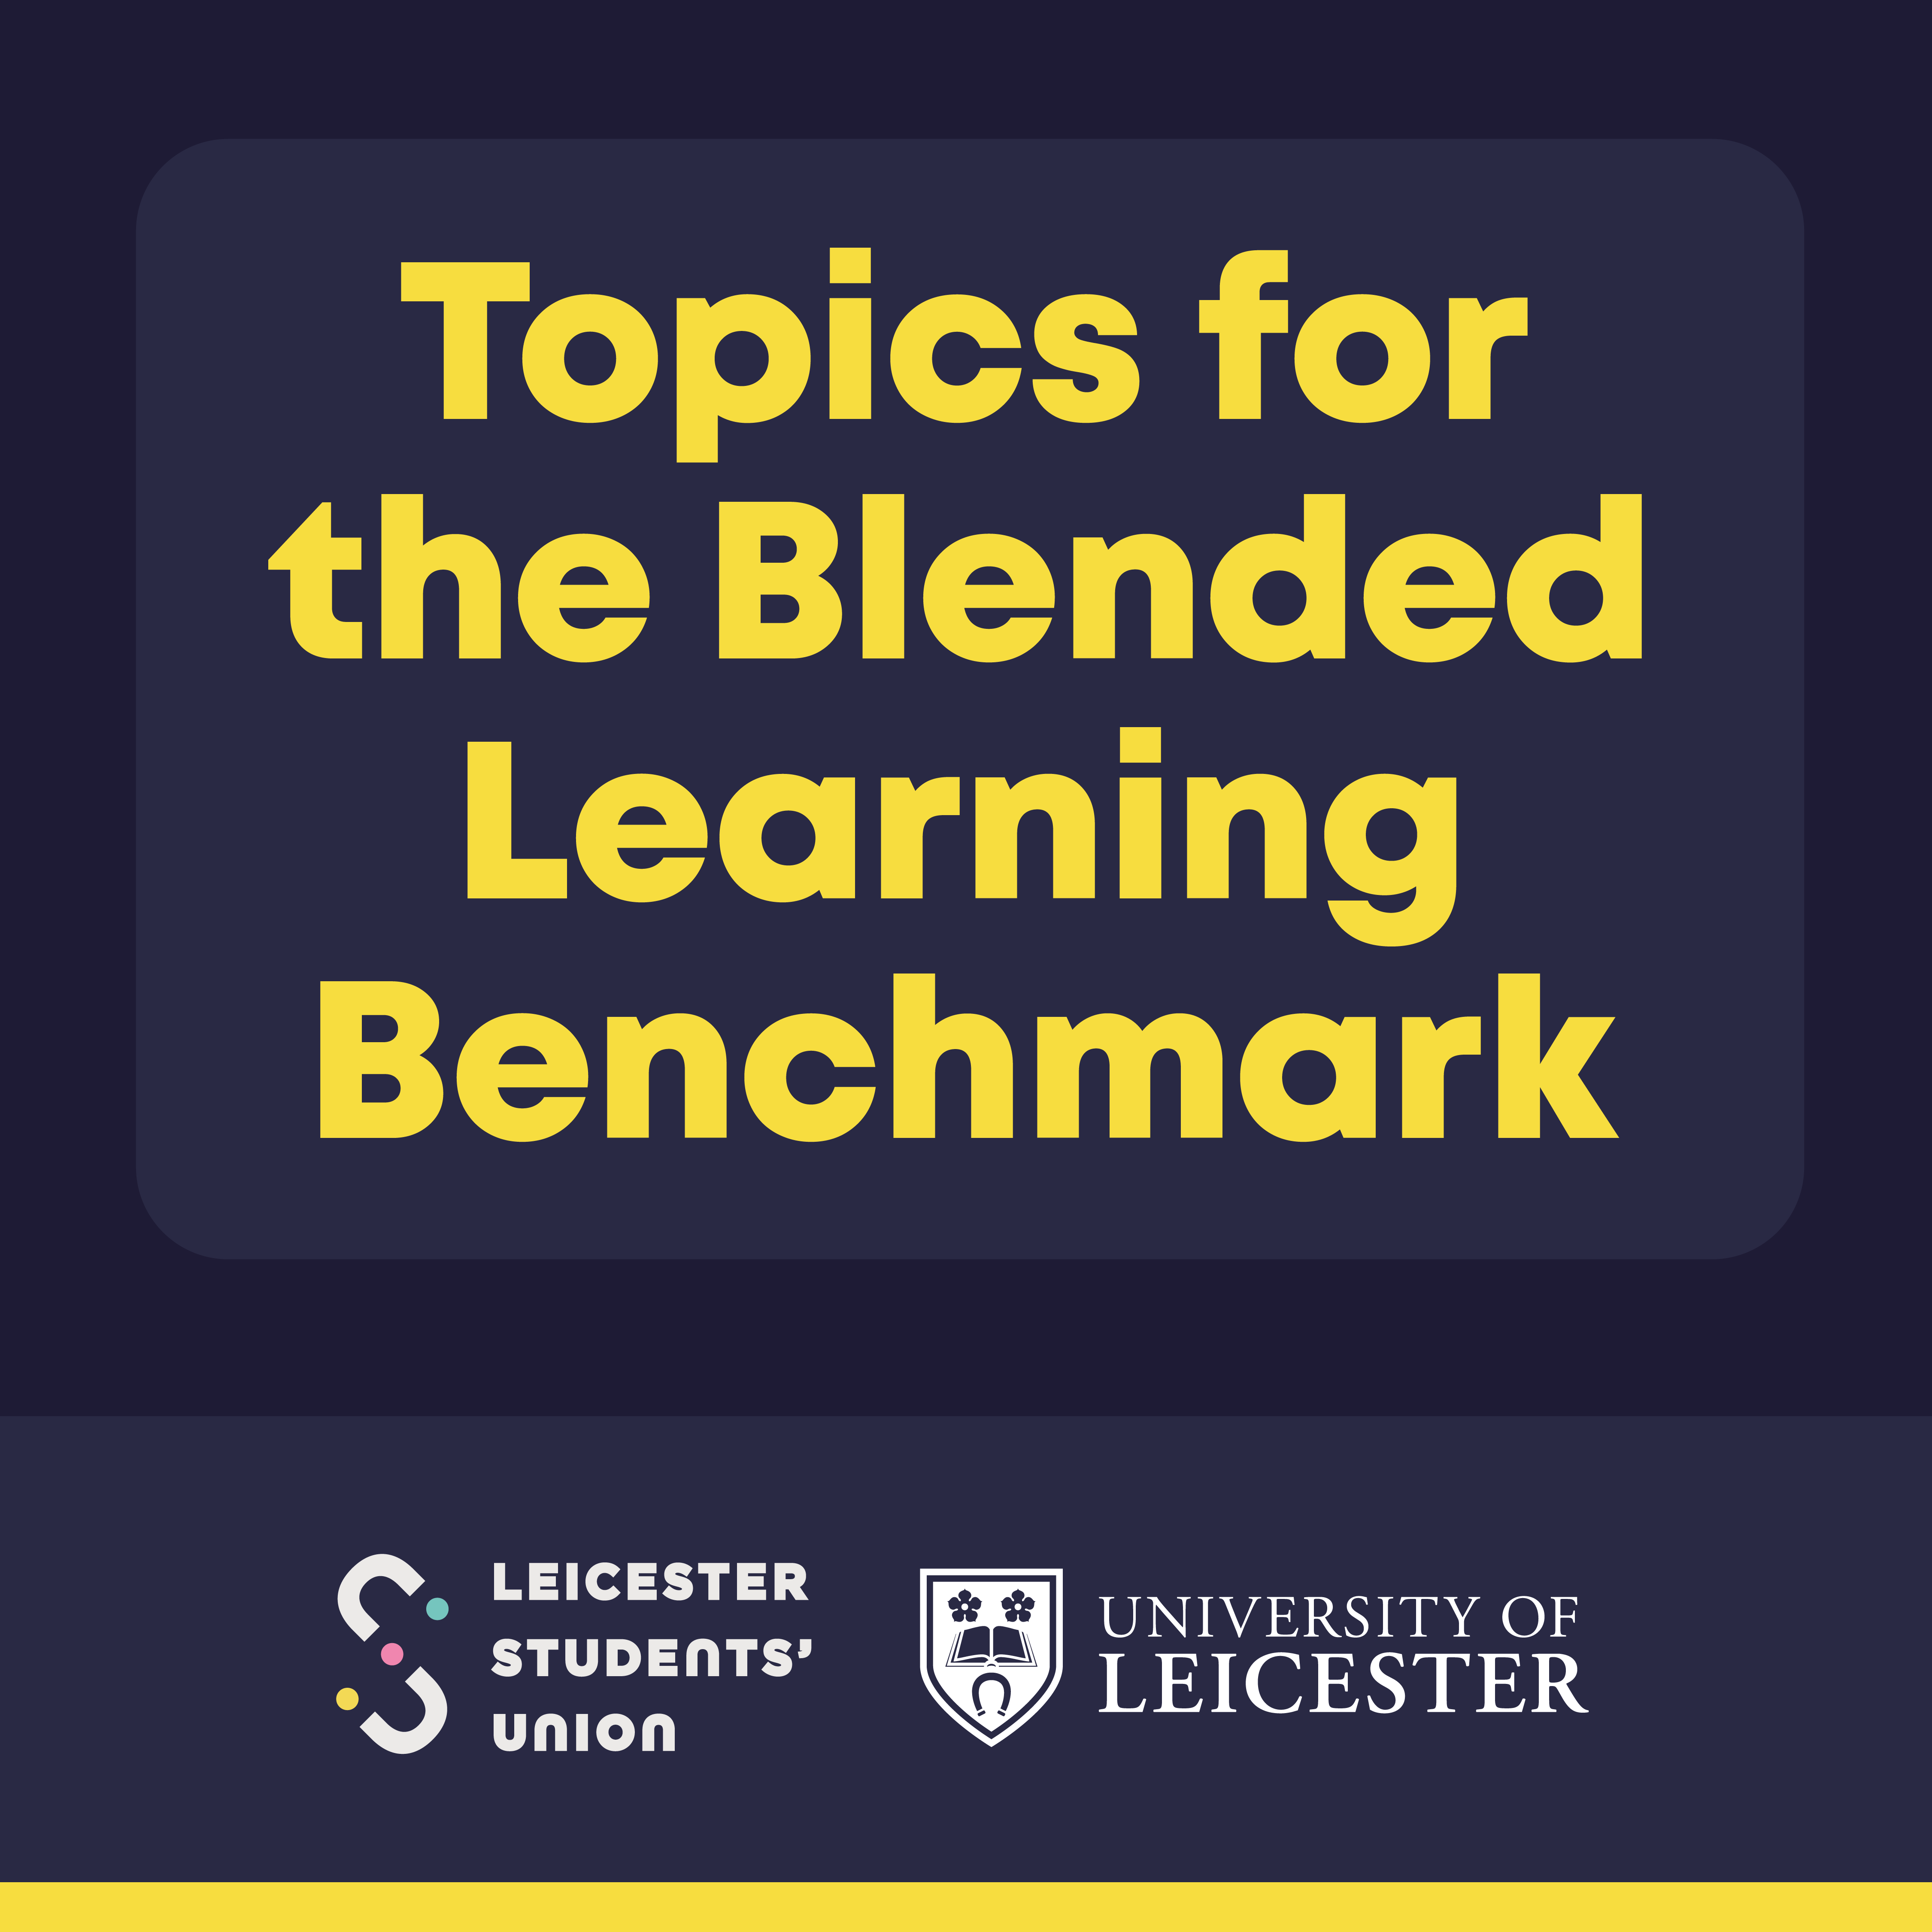 Topics for the Blended Learning Benchmark